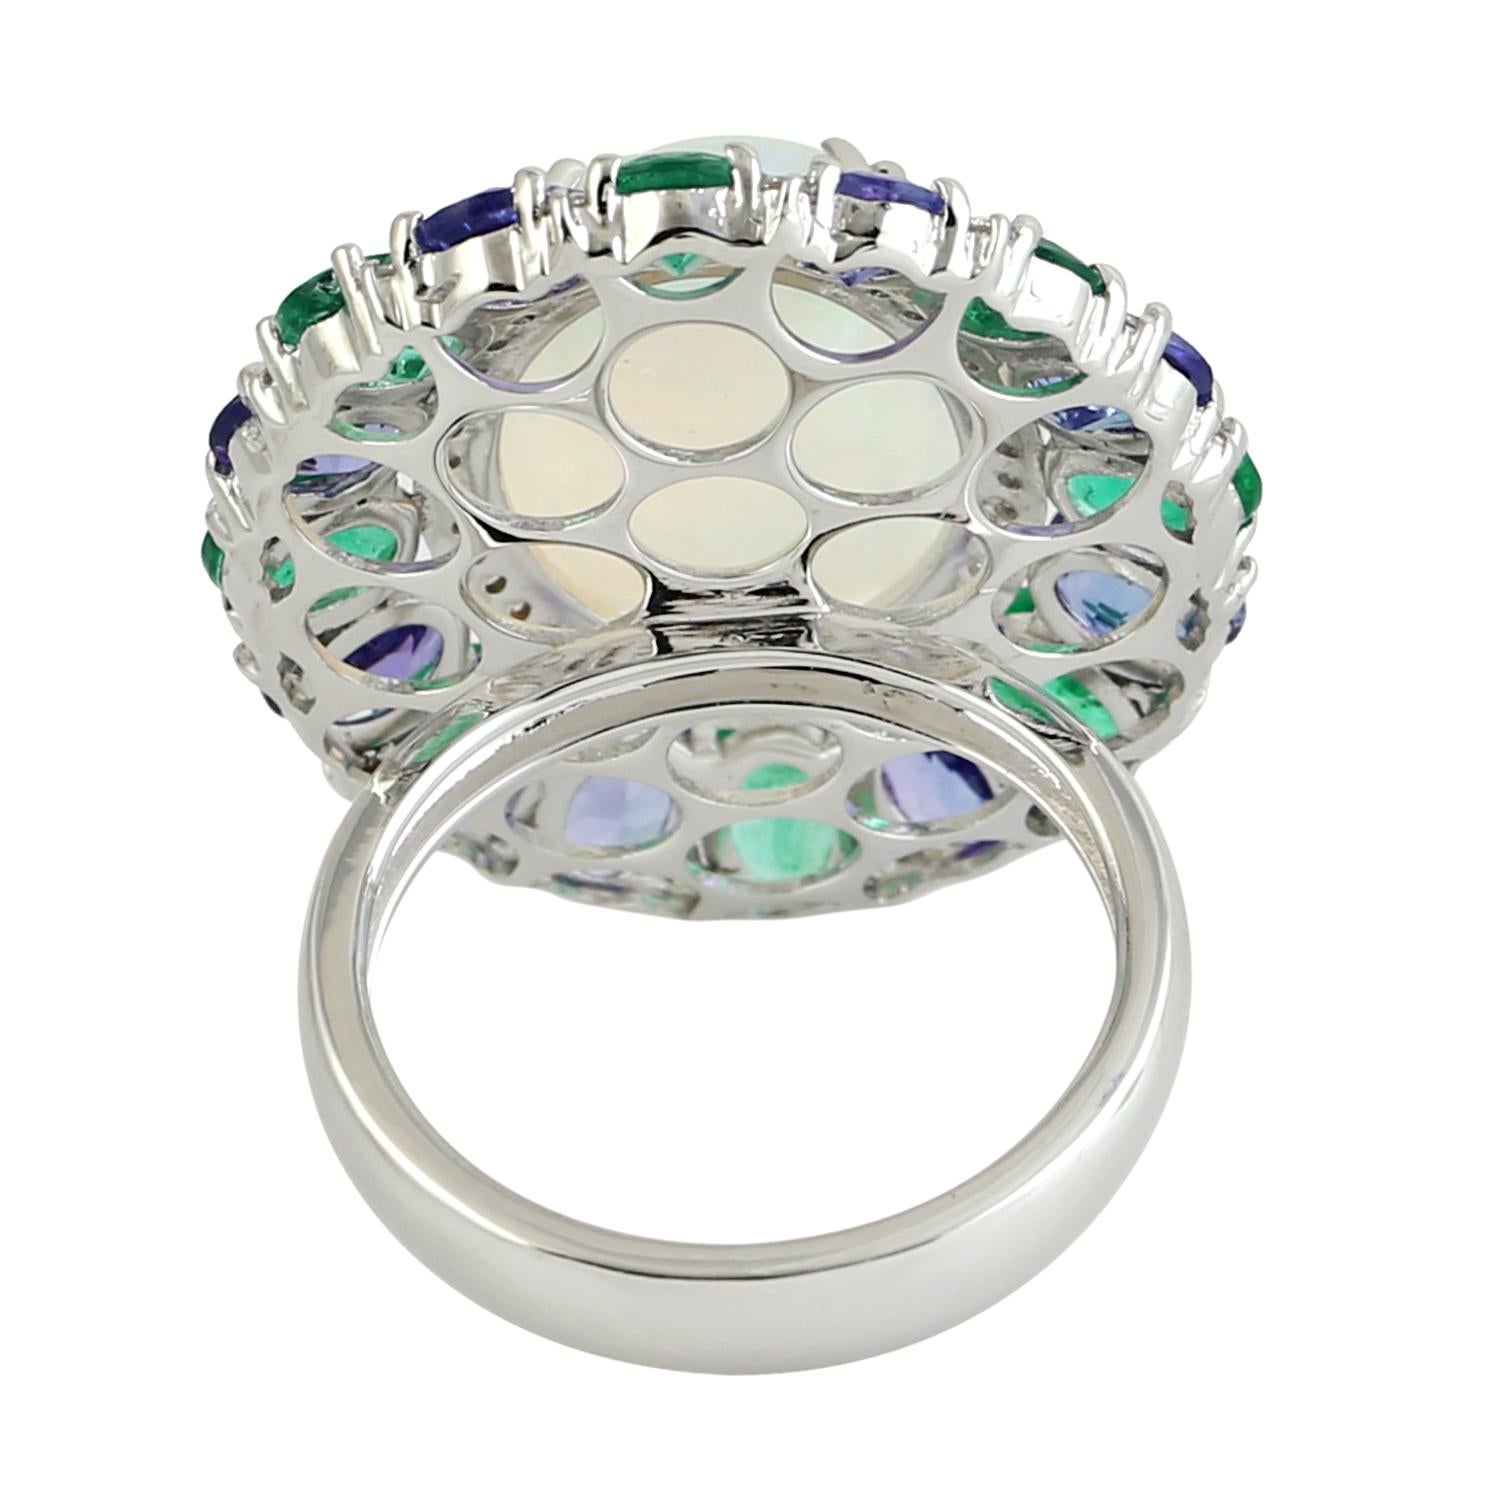 Contemporary Opal & Multi Gemstone Ring With Diamonds Made In 18k White Gold For Sale